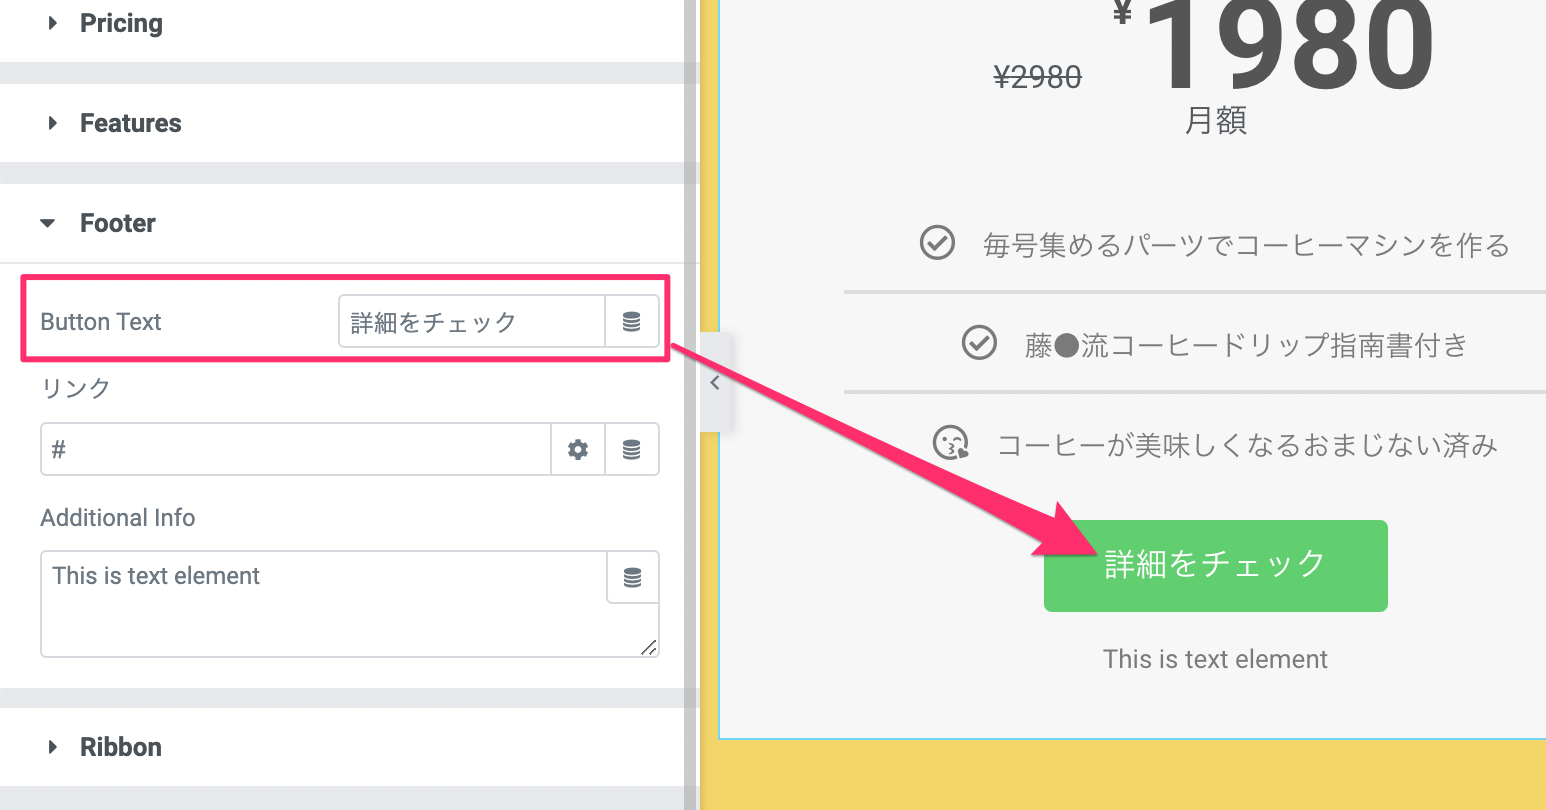 Button Text編集後の表示画面